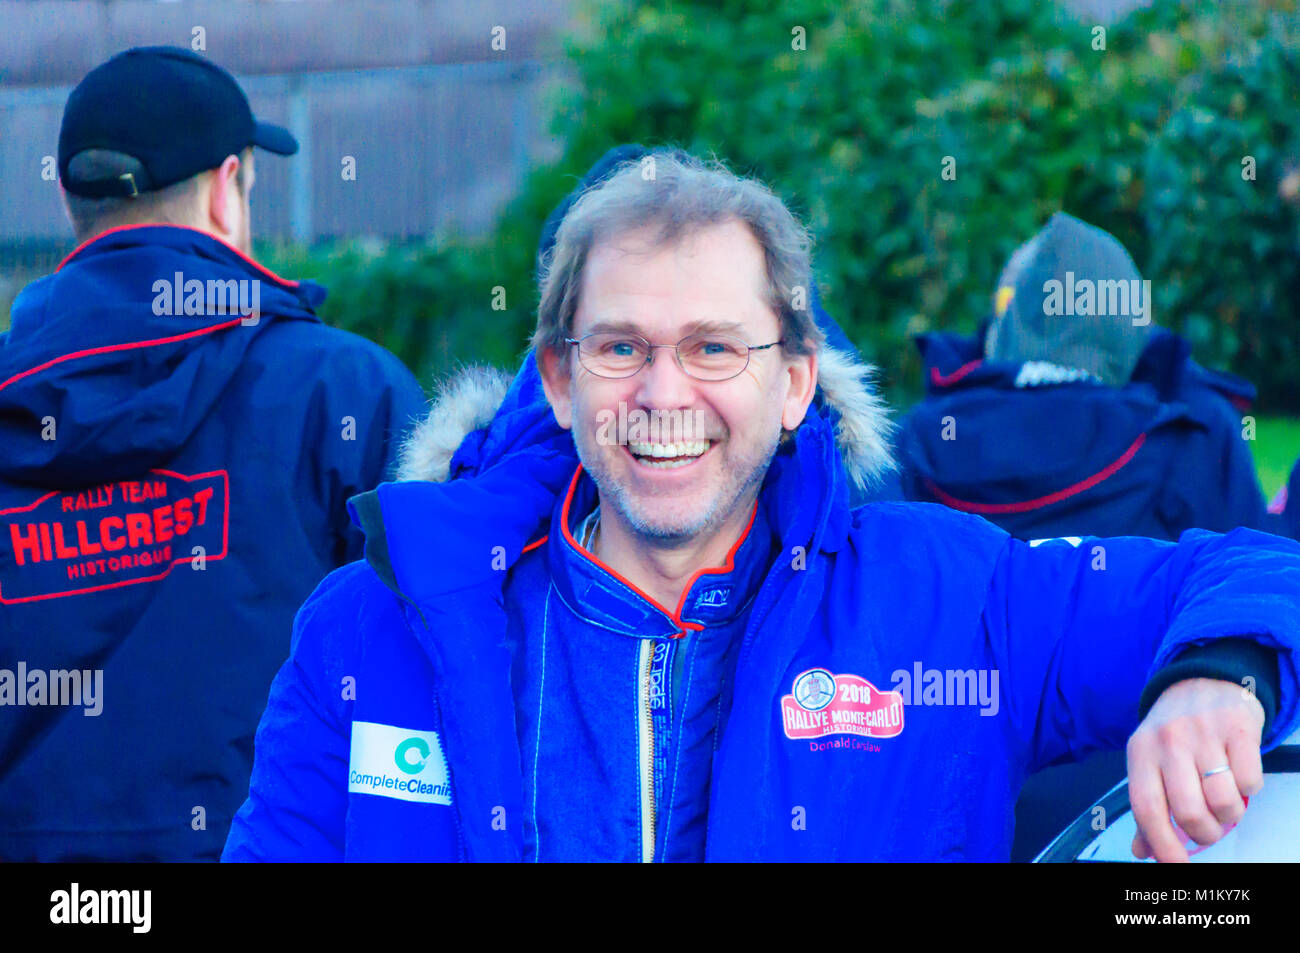 Paisley, Scotland, UK. 31st January 2018: Smiling racing driver Donald Carslaw. The Monte Carlo Rally starts at Paisley Abbey. This year sees the 21st  Historique event and the 3rd Classique event. Both events are staged by the Automobile Club de Monaco  and take place on open public roads. The distance to Monte Carlo is 1270 miles. Credit: Skully/Alamy Live News Stock Photo